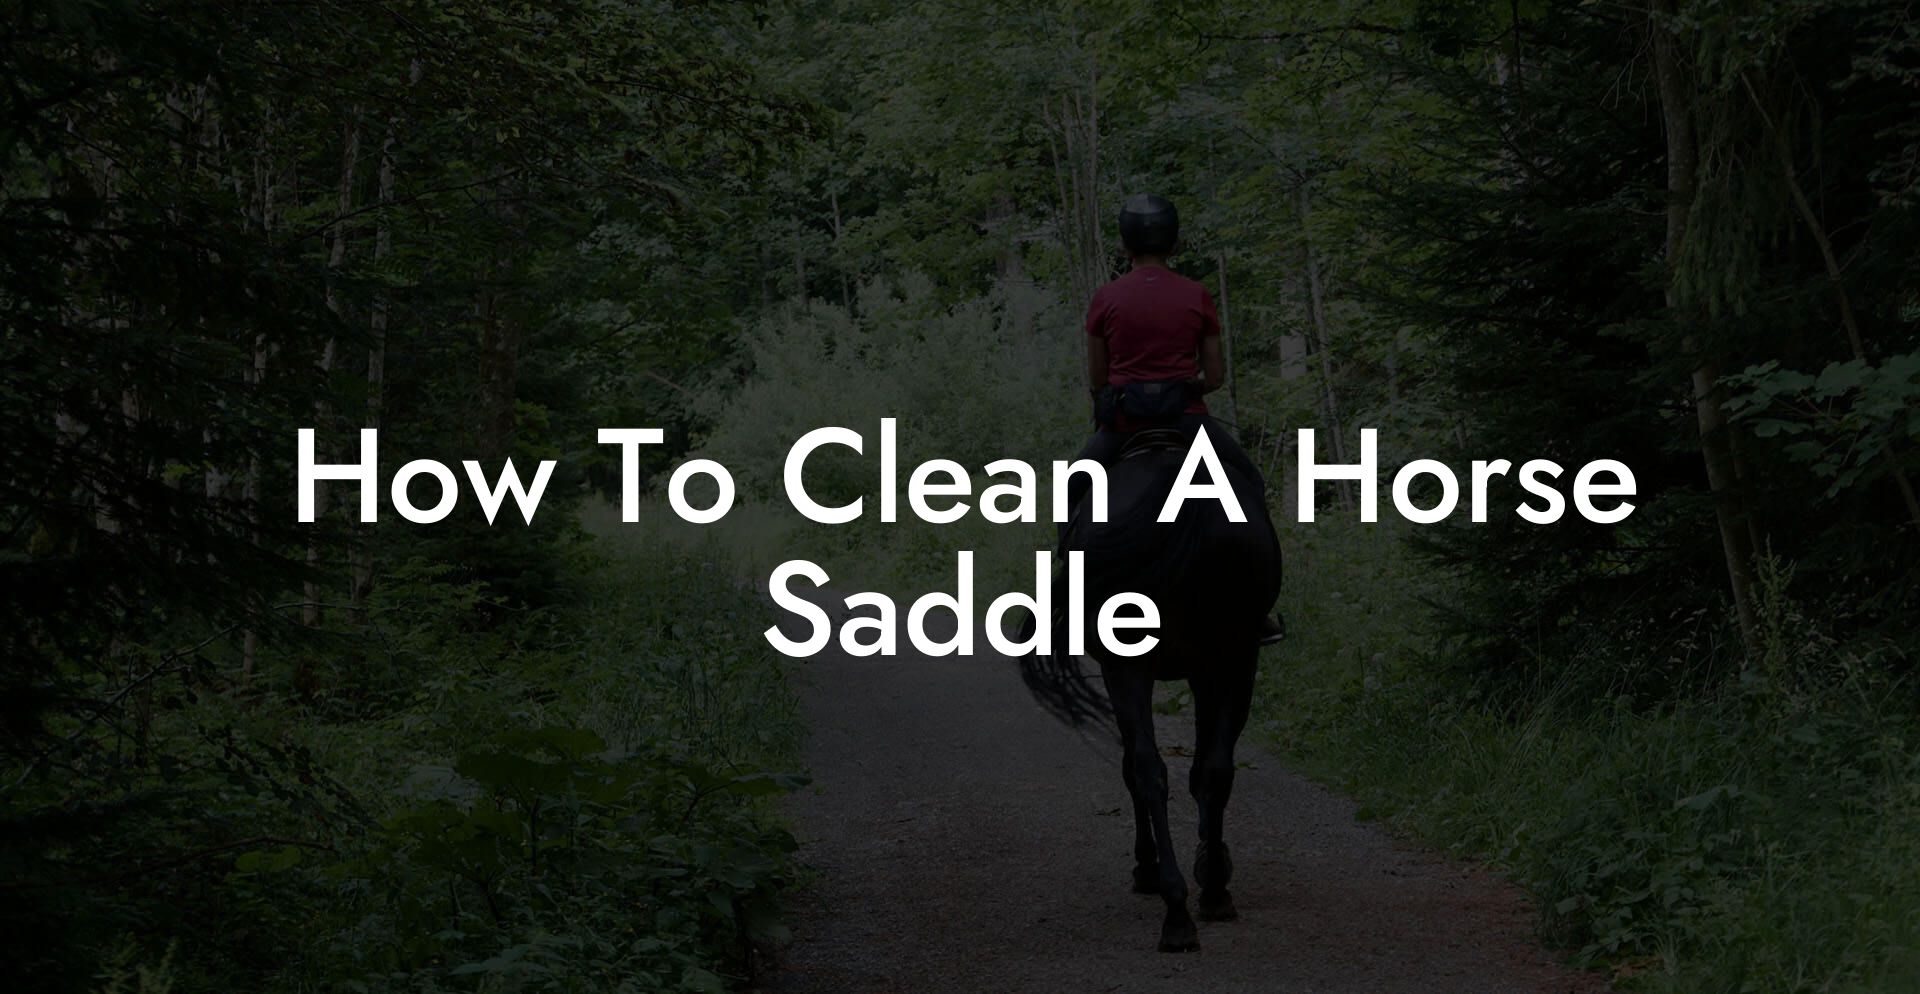 How To Clean A Horse Saddle